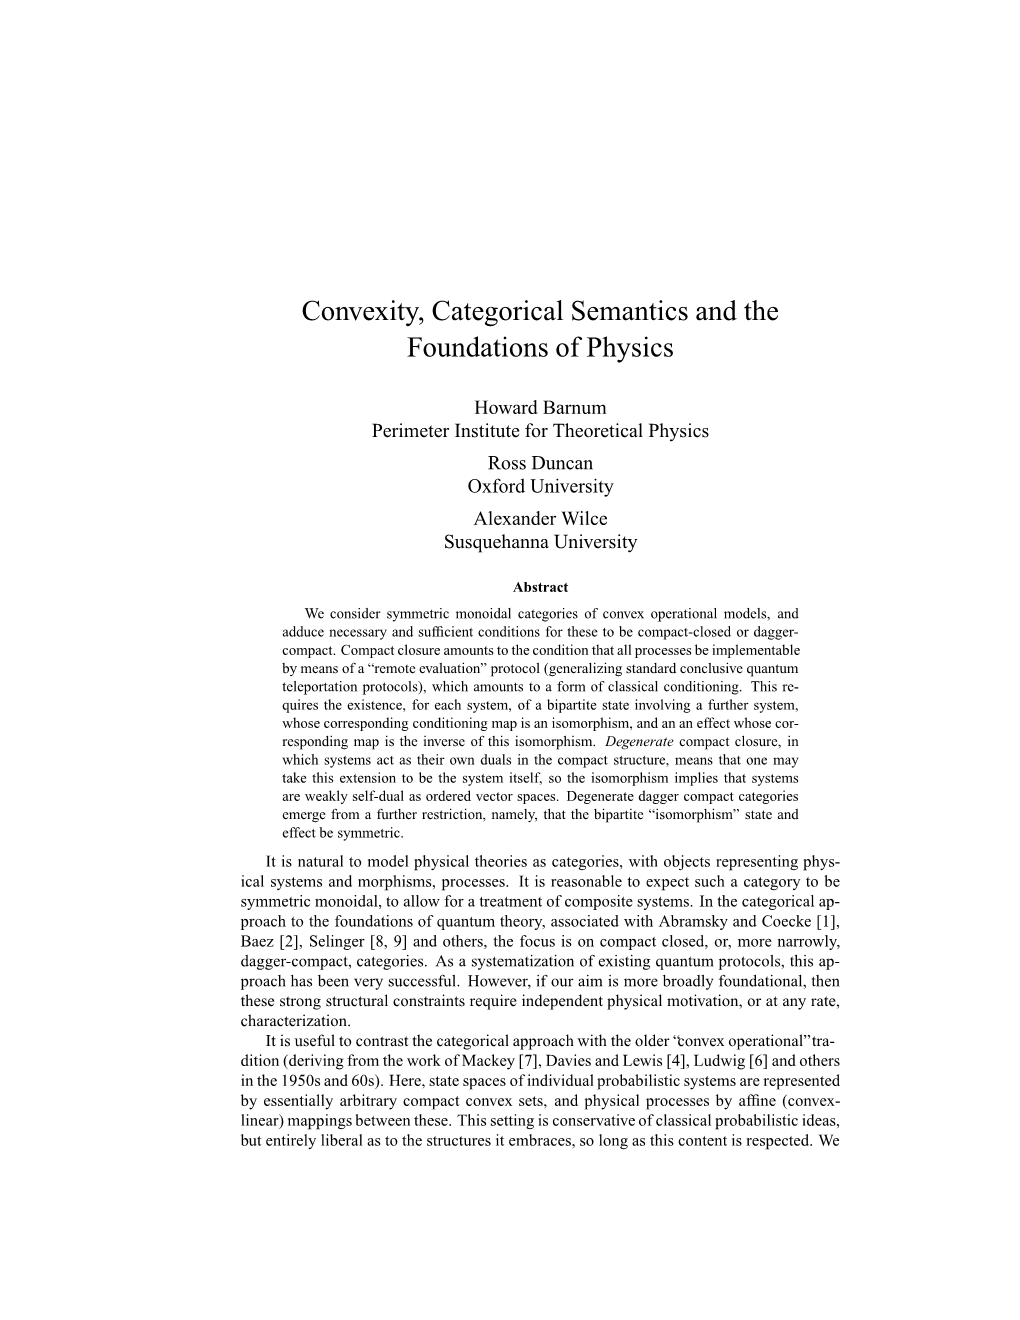 Convexity, Categorical Semantics and the Foundations of Physics